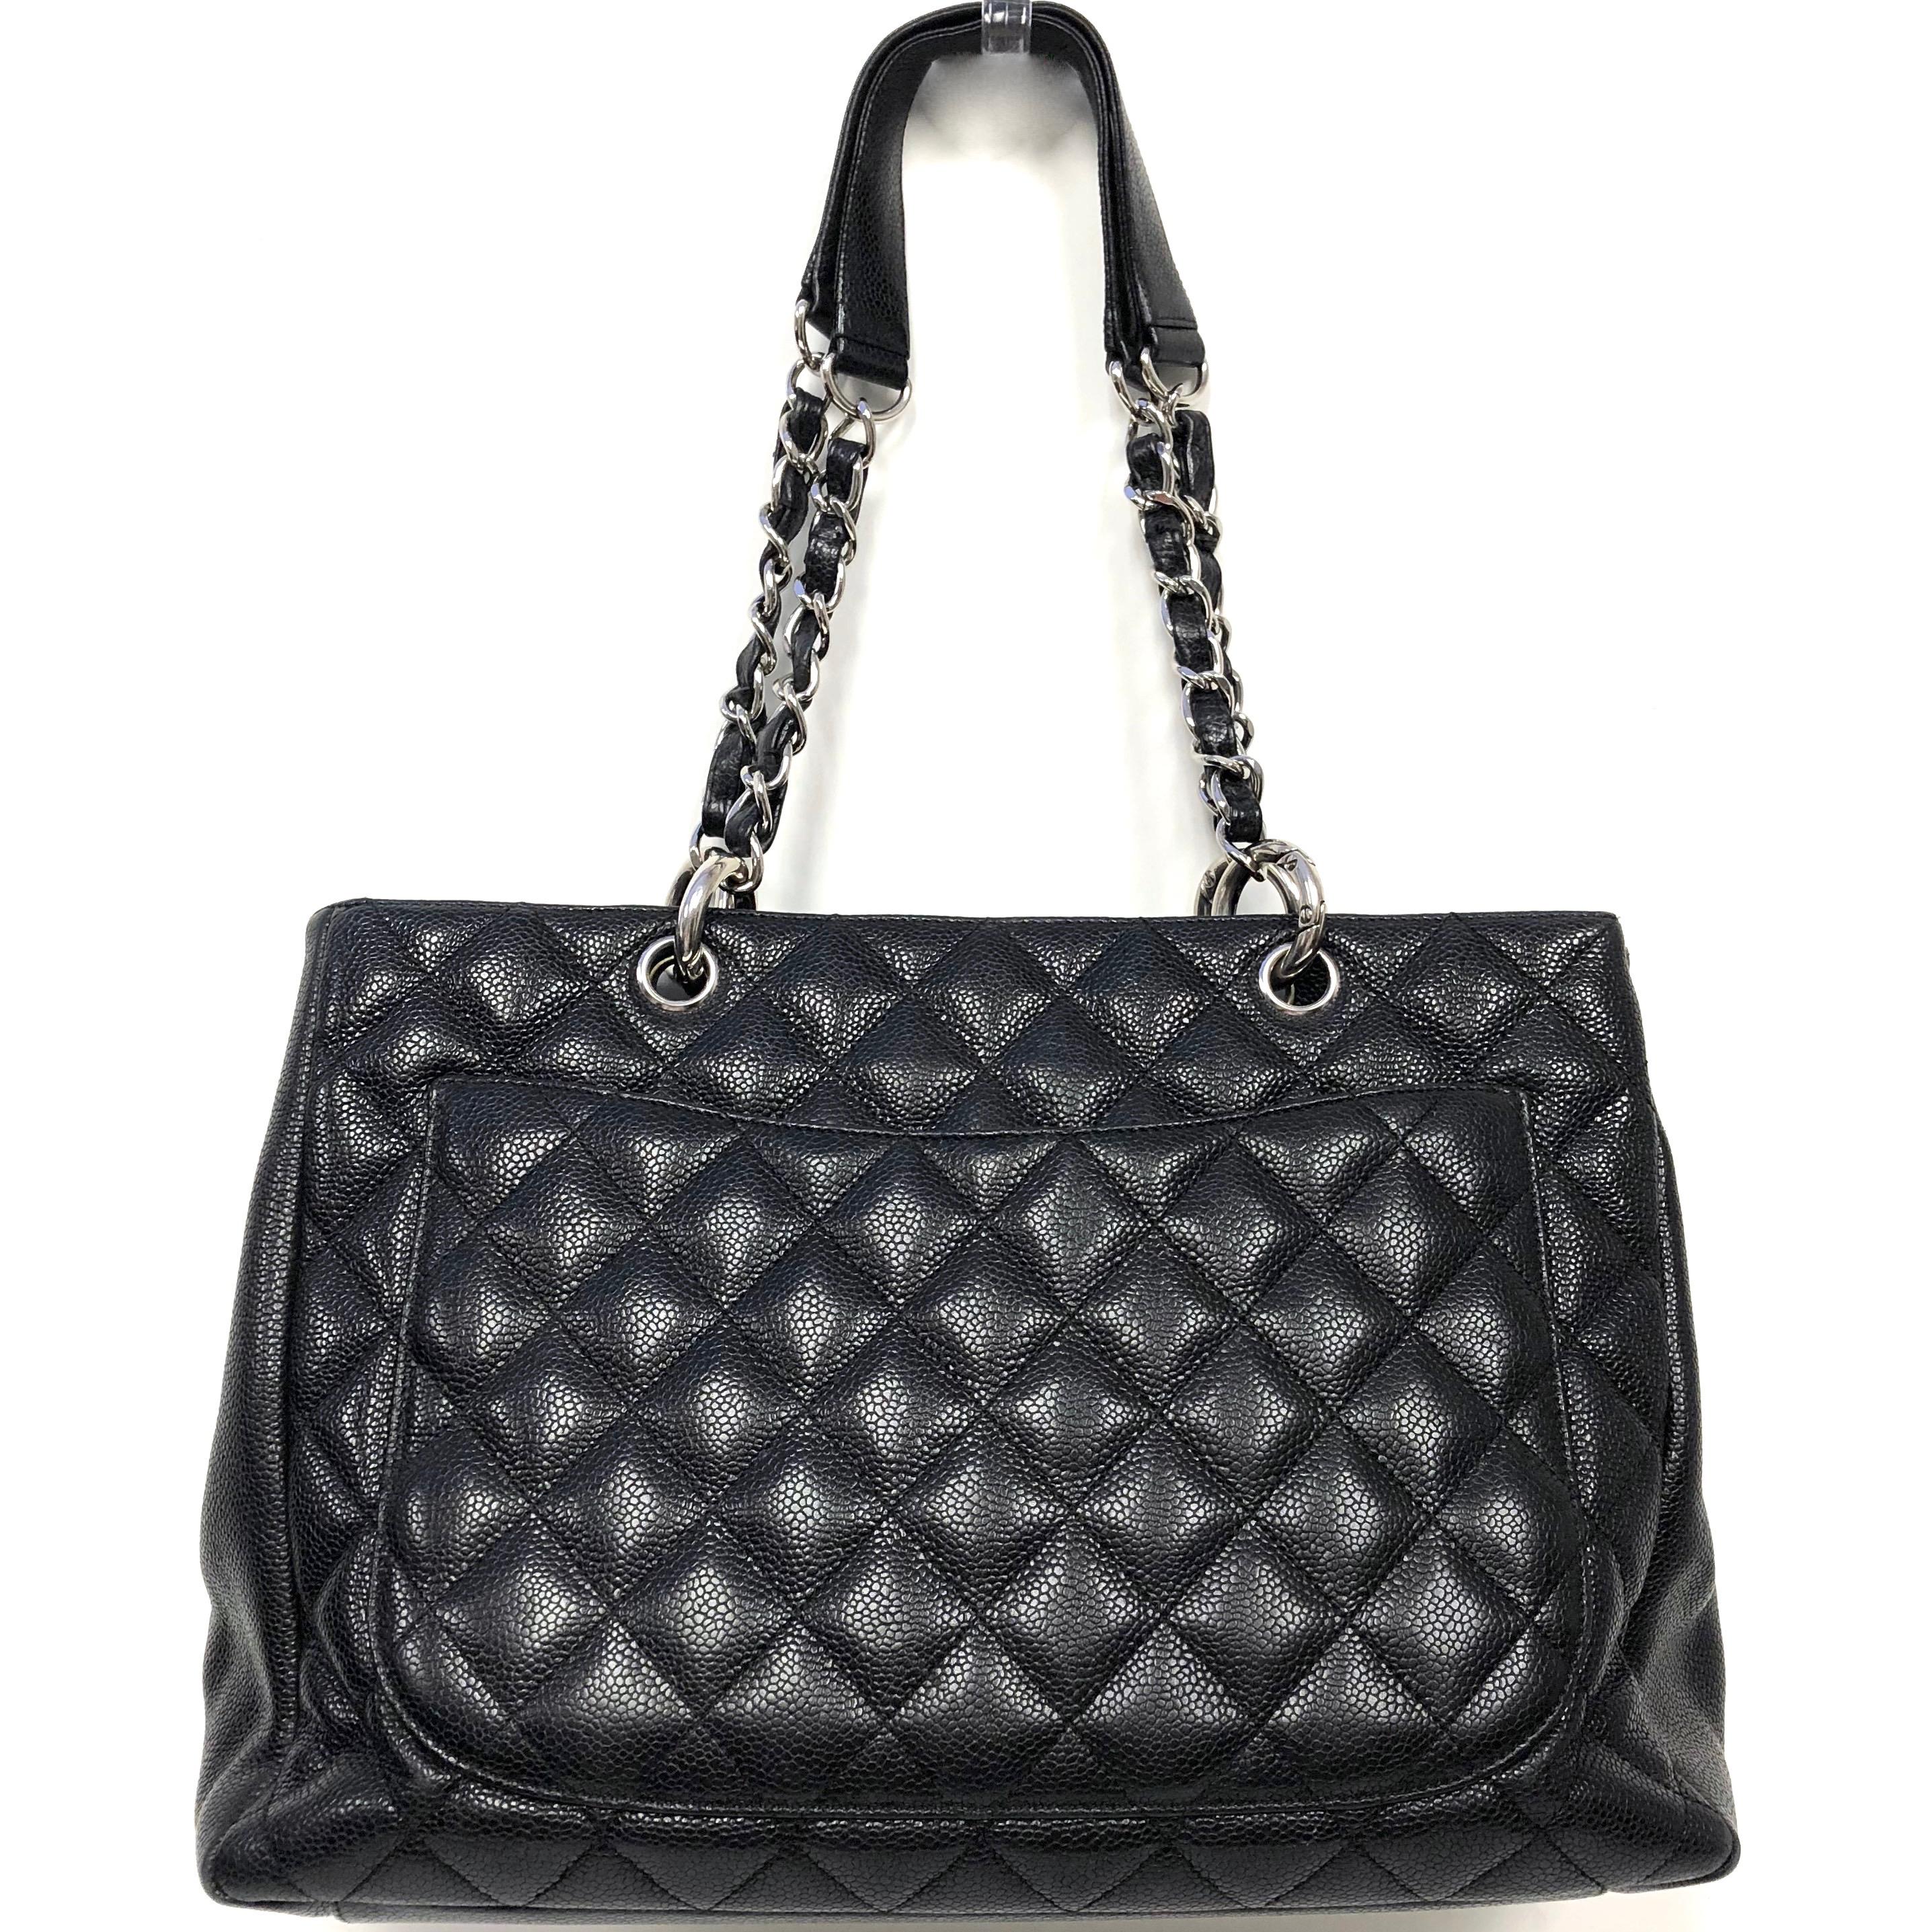 Chanel quilted Grand Shopping Tote GST, crafted in diamond-quilted caviar leather in black. The bag features leather-threaded polished silver chain link shoulder straps with leather shoulder pads, a prominent quilted Chanel CC logo on the front, and